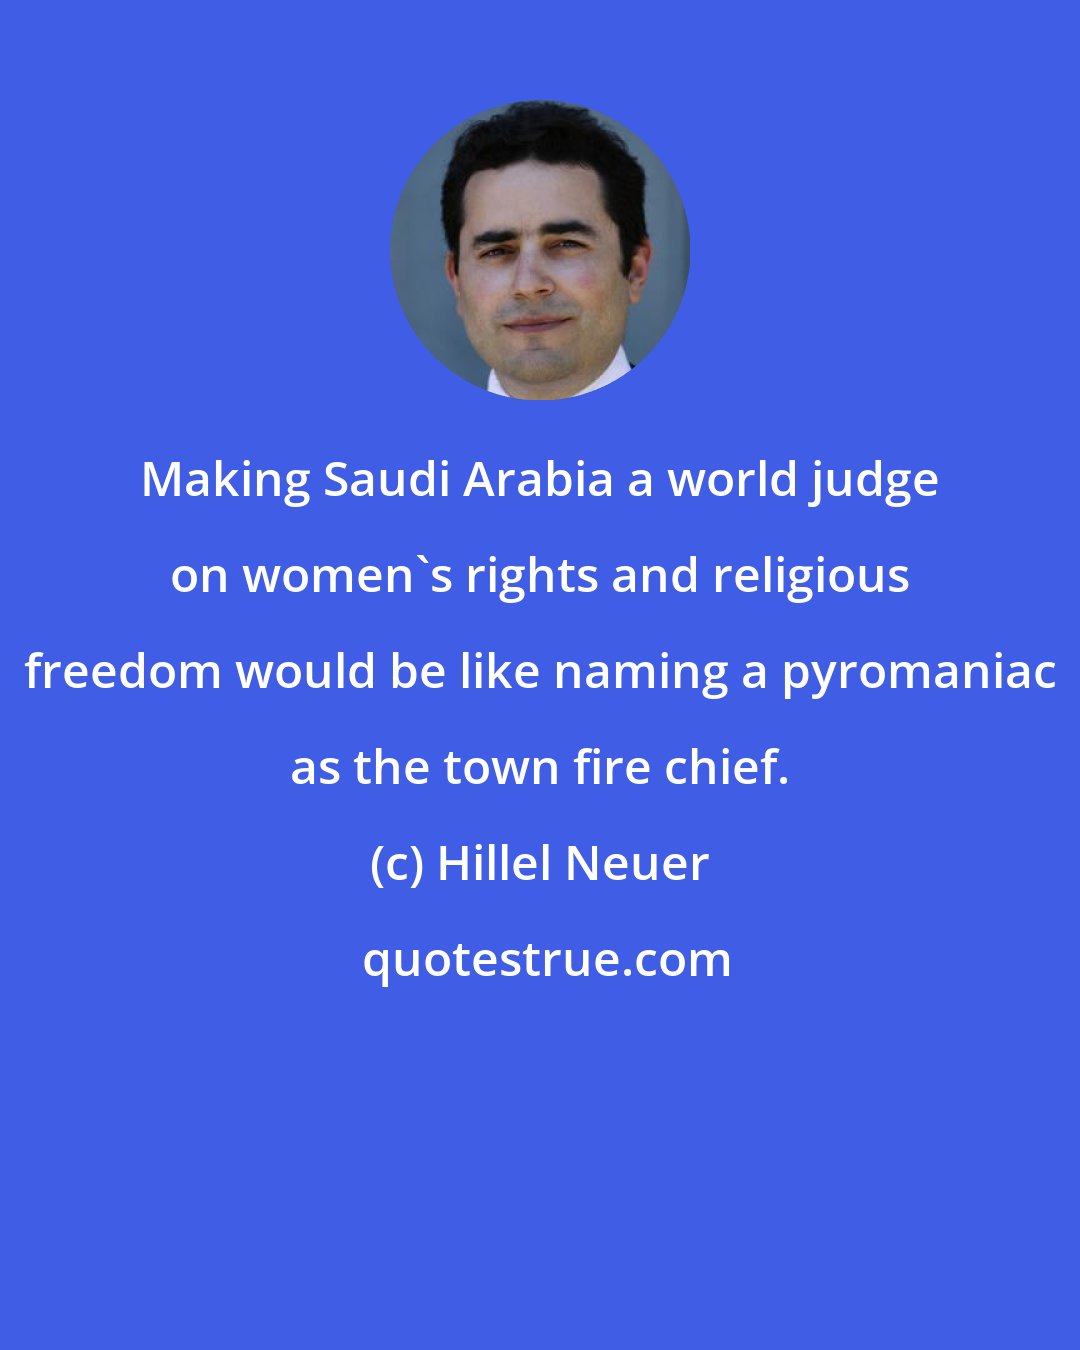 Hillel Neuer: Making Saudi Arabia a world judge on women's rights and religious freedom would be like naming a pyromaniac as the town fire chief.